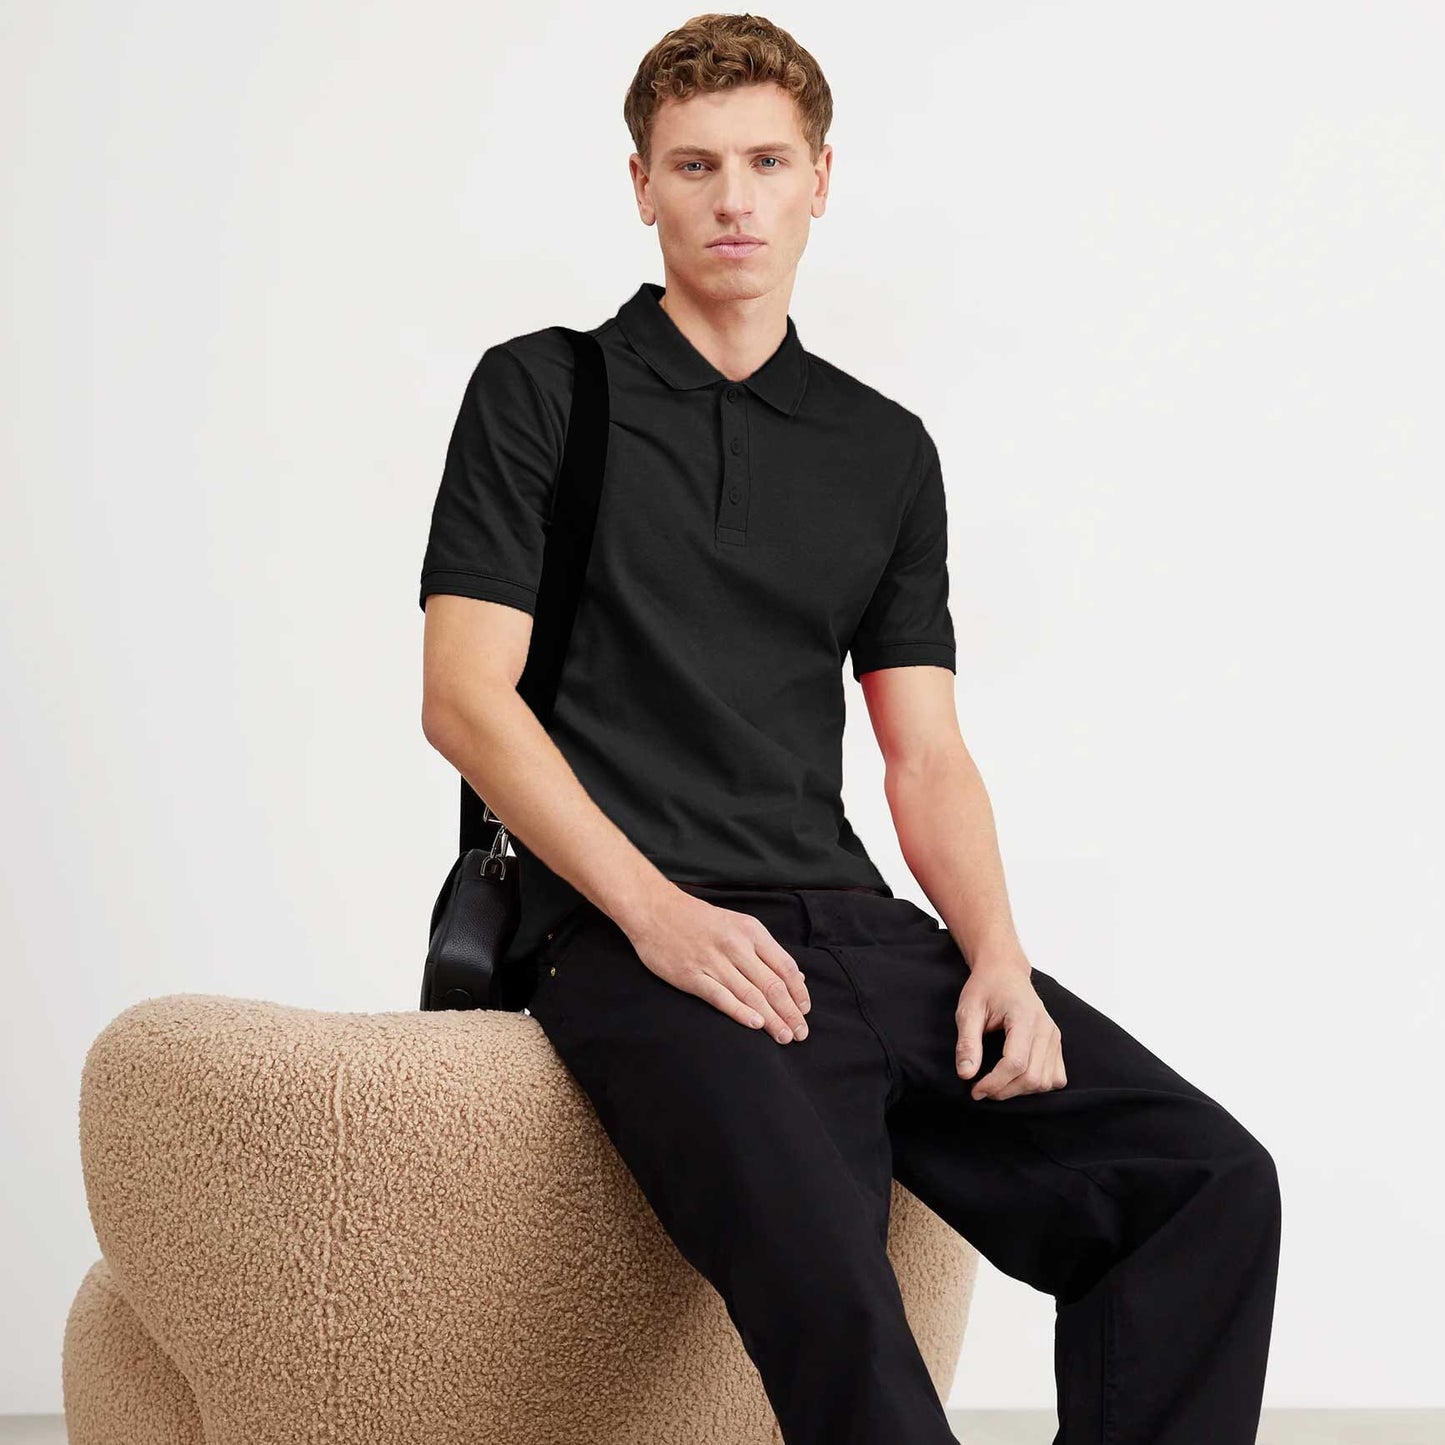 Platic Men's Short Sleeve with Minor Fault Polo Shirt Minor Fault Image Black XS 